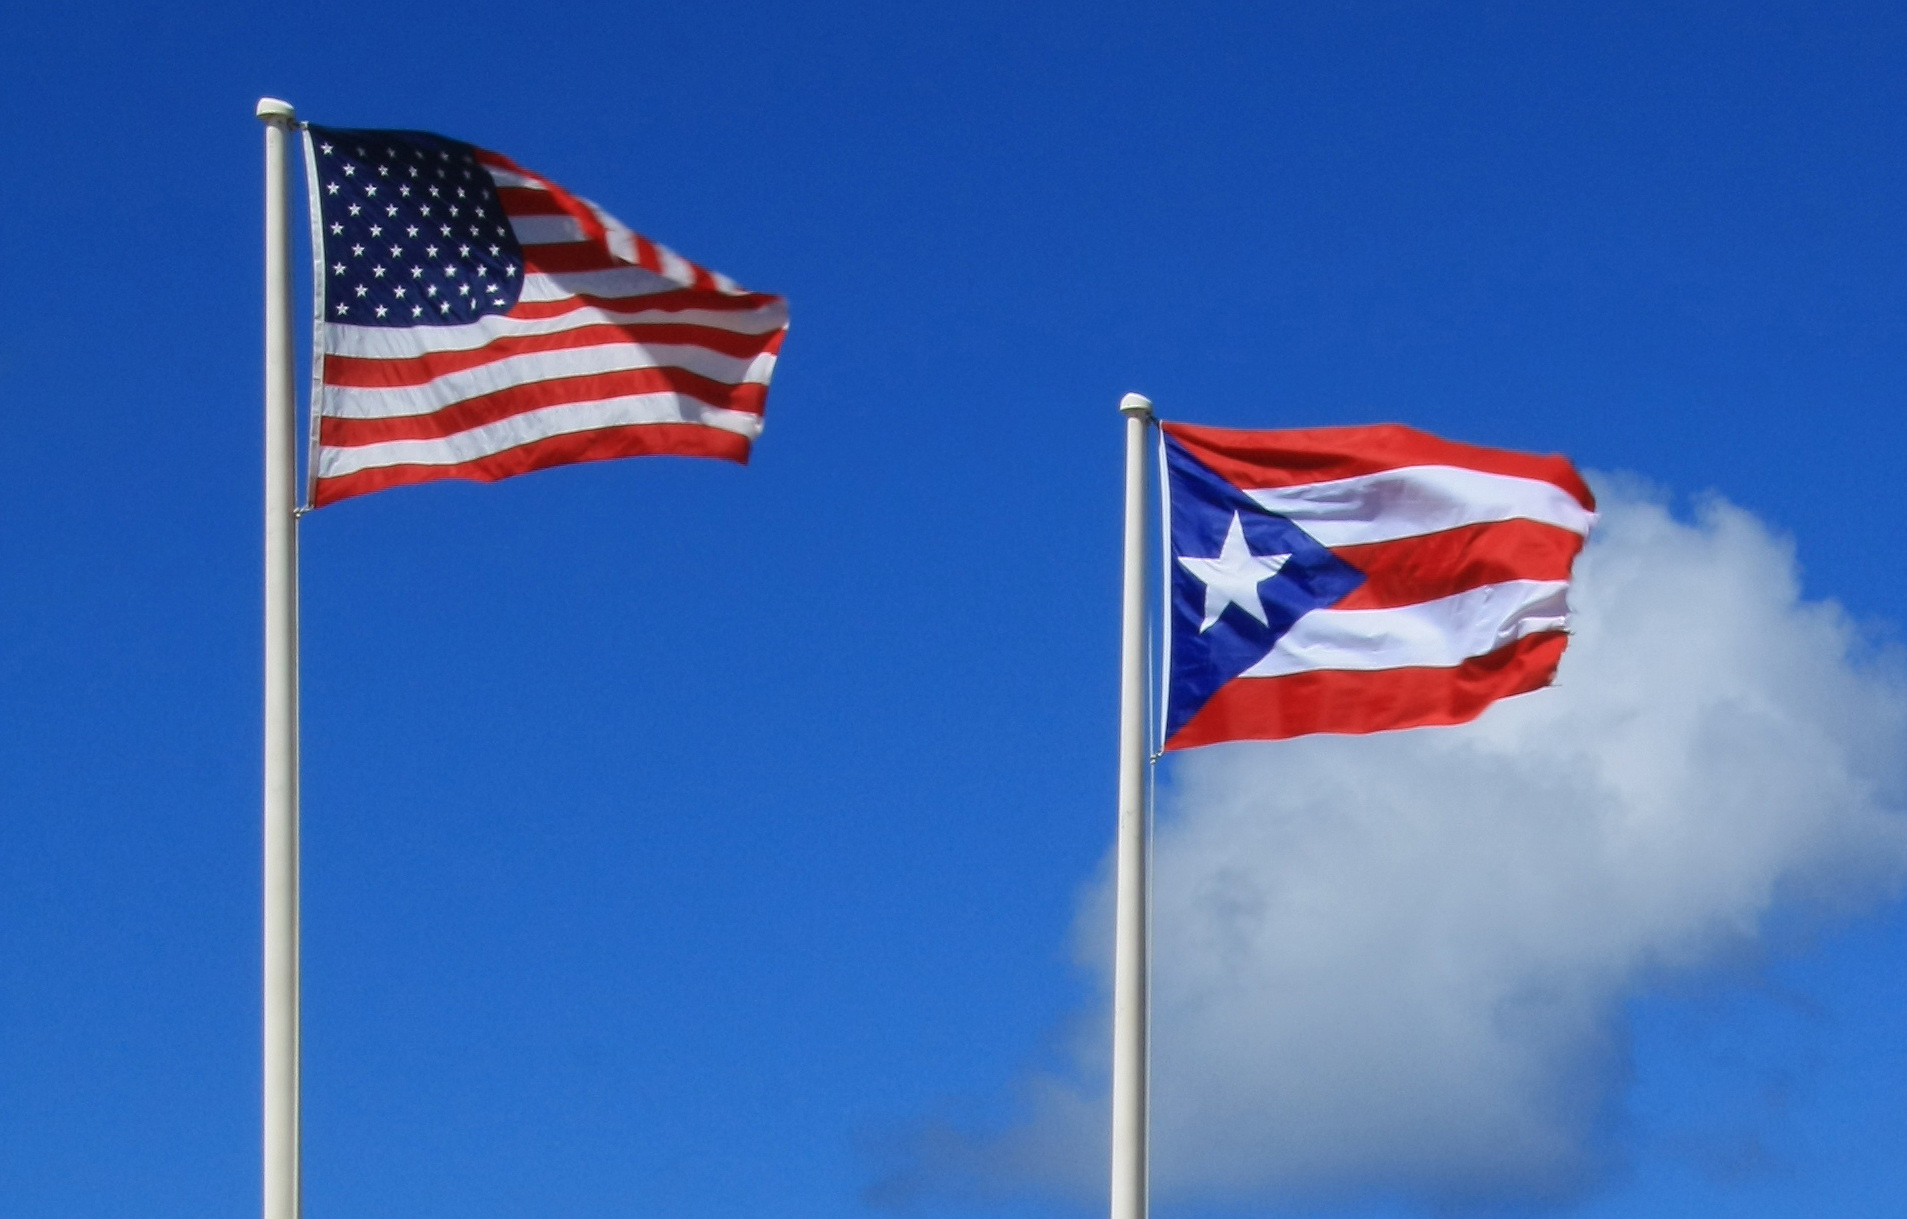 American flag and Puerto Rico flag against blue sky